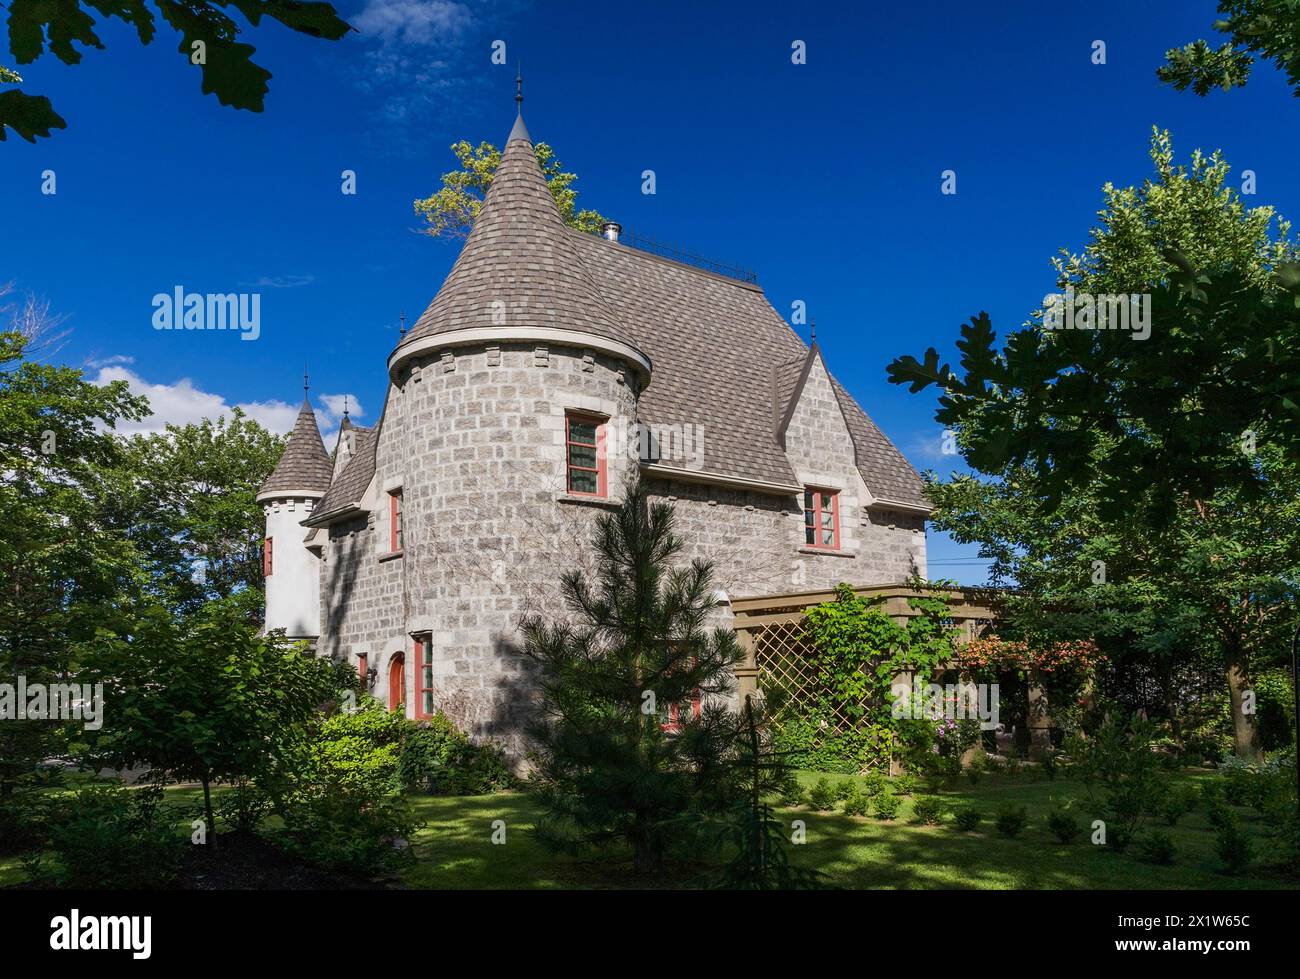 2006 reproduction of a 16th century grey stone and mortar Renaissance castle style residential home facade in summer, Quebec, Canada Stock Photo